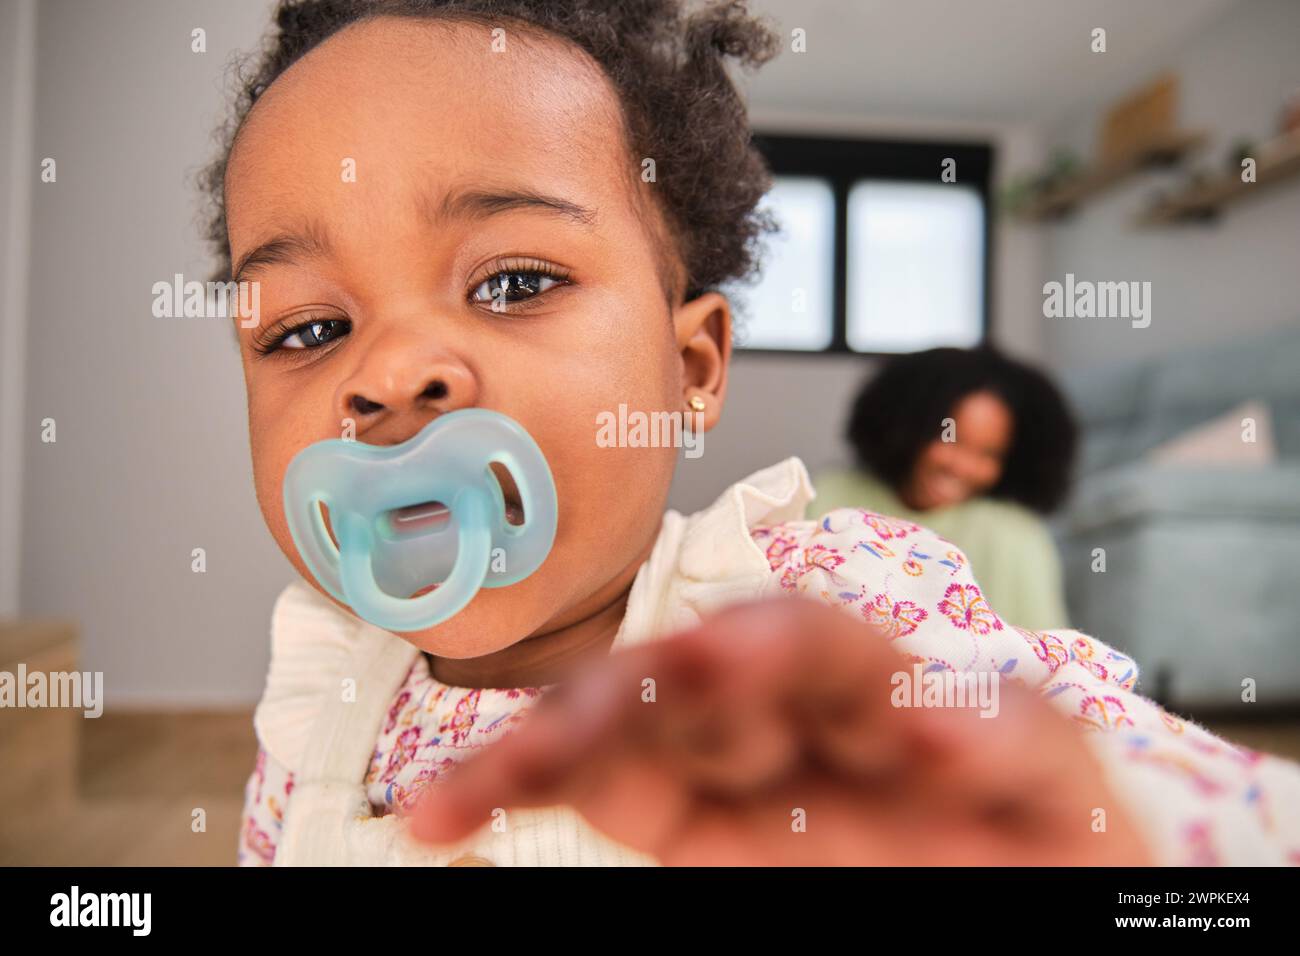 Cuban toddler baby girl trying to reach the camera at home. Stock Photo